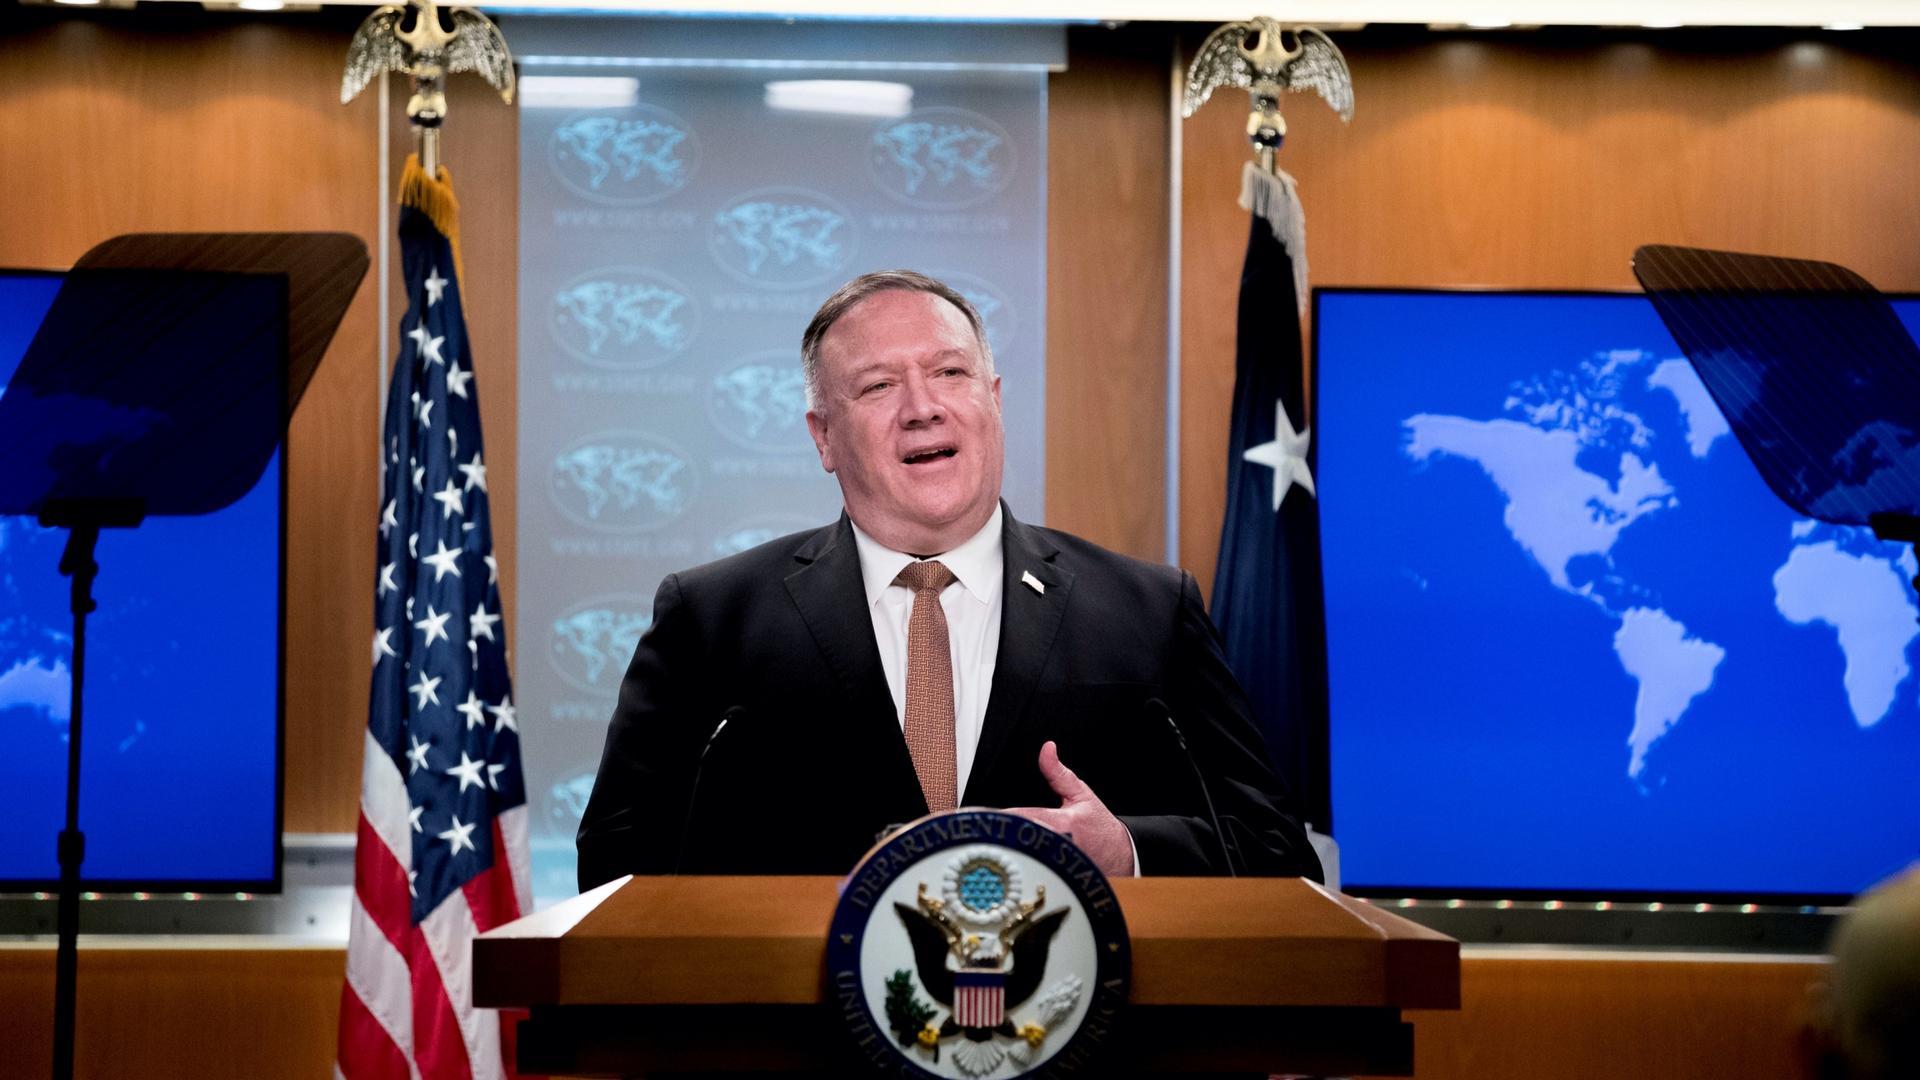 A man wearing a suit stands at a State Department podium between two flags 